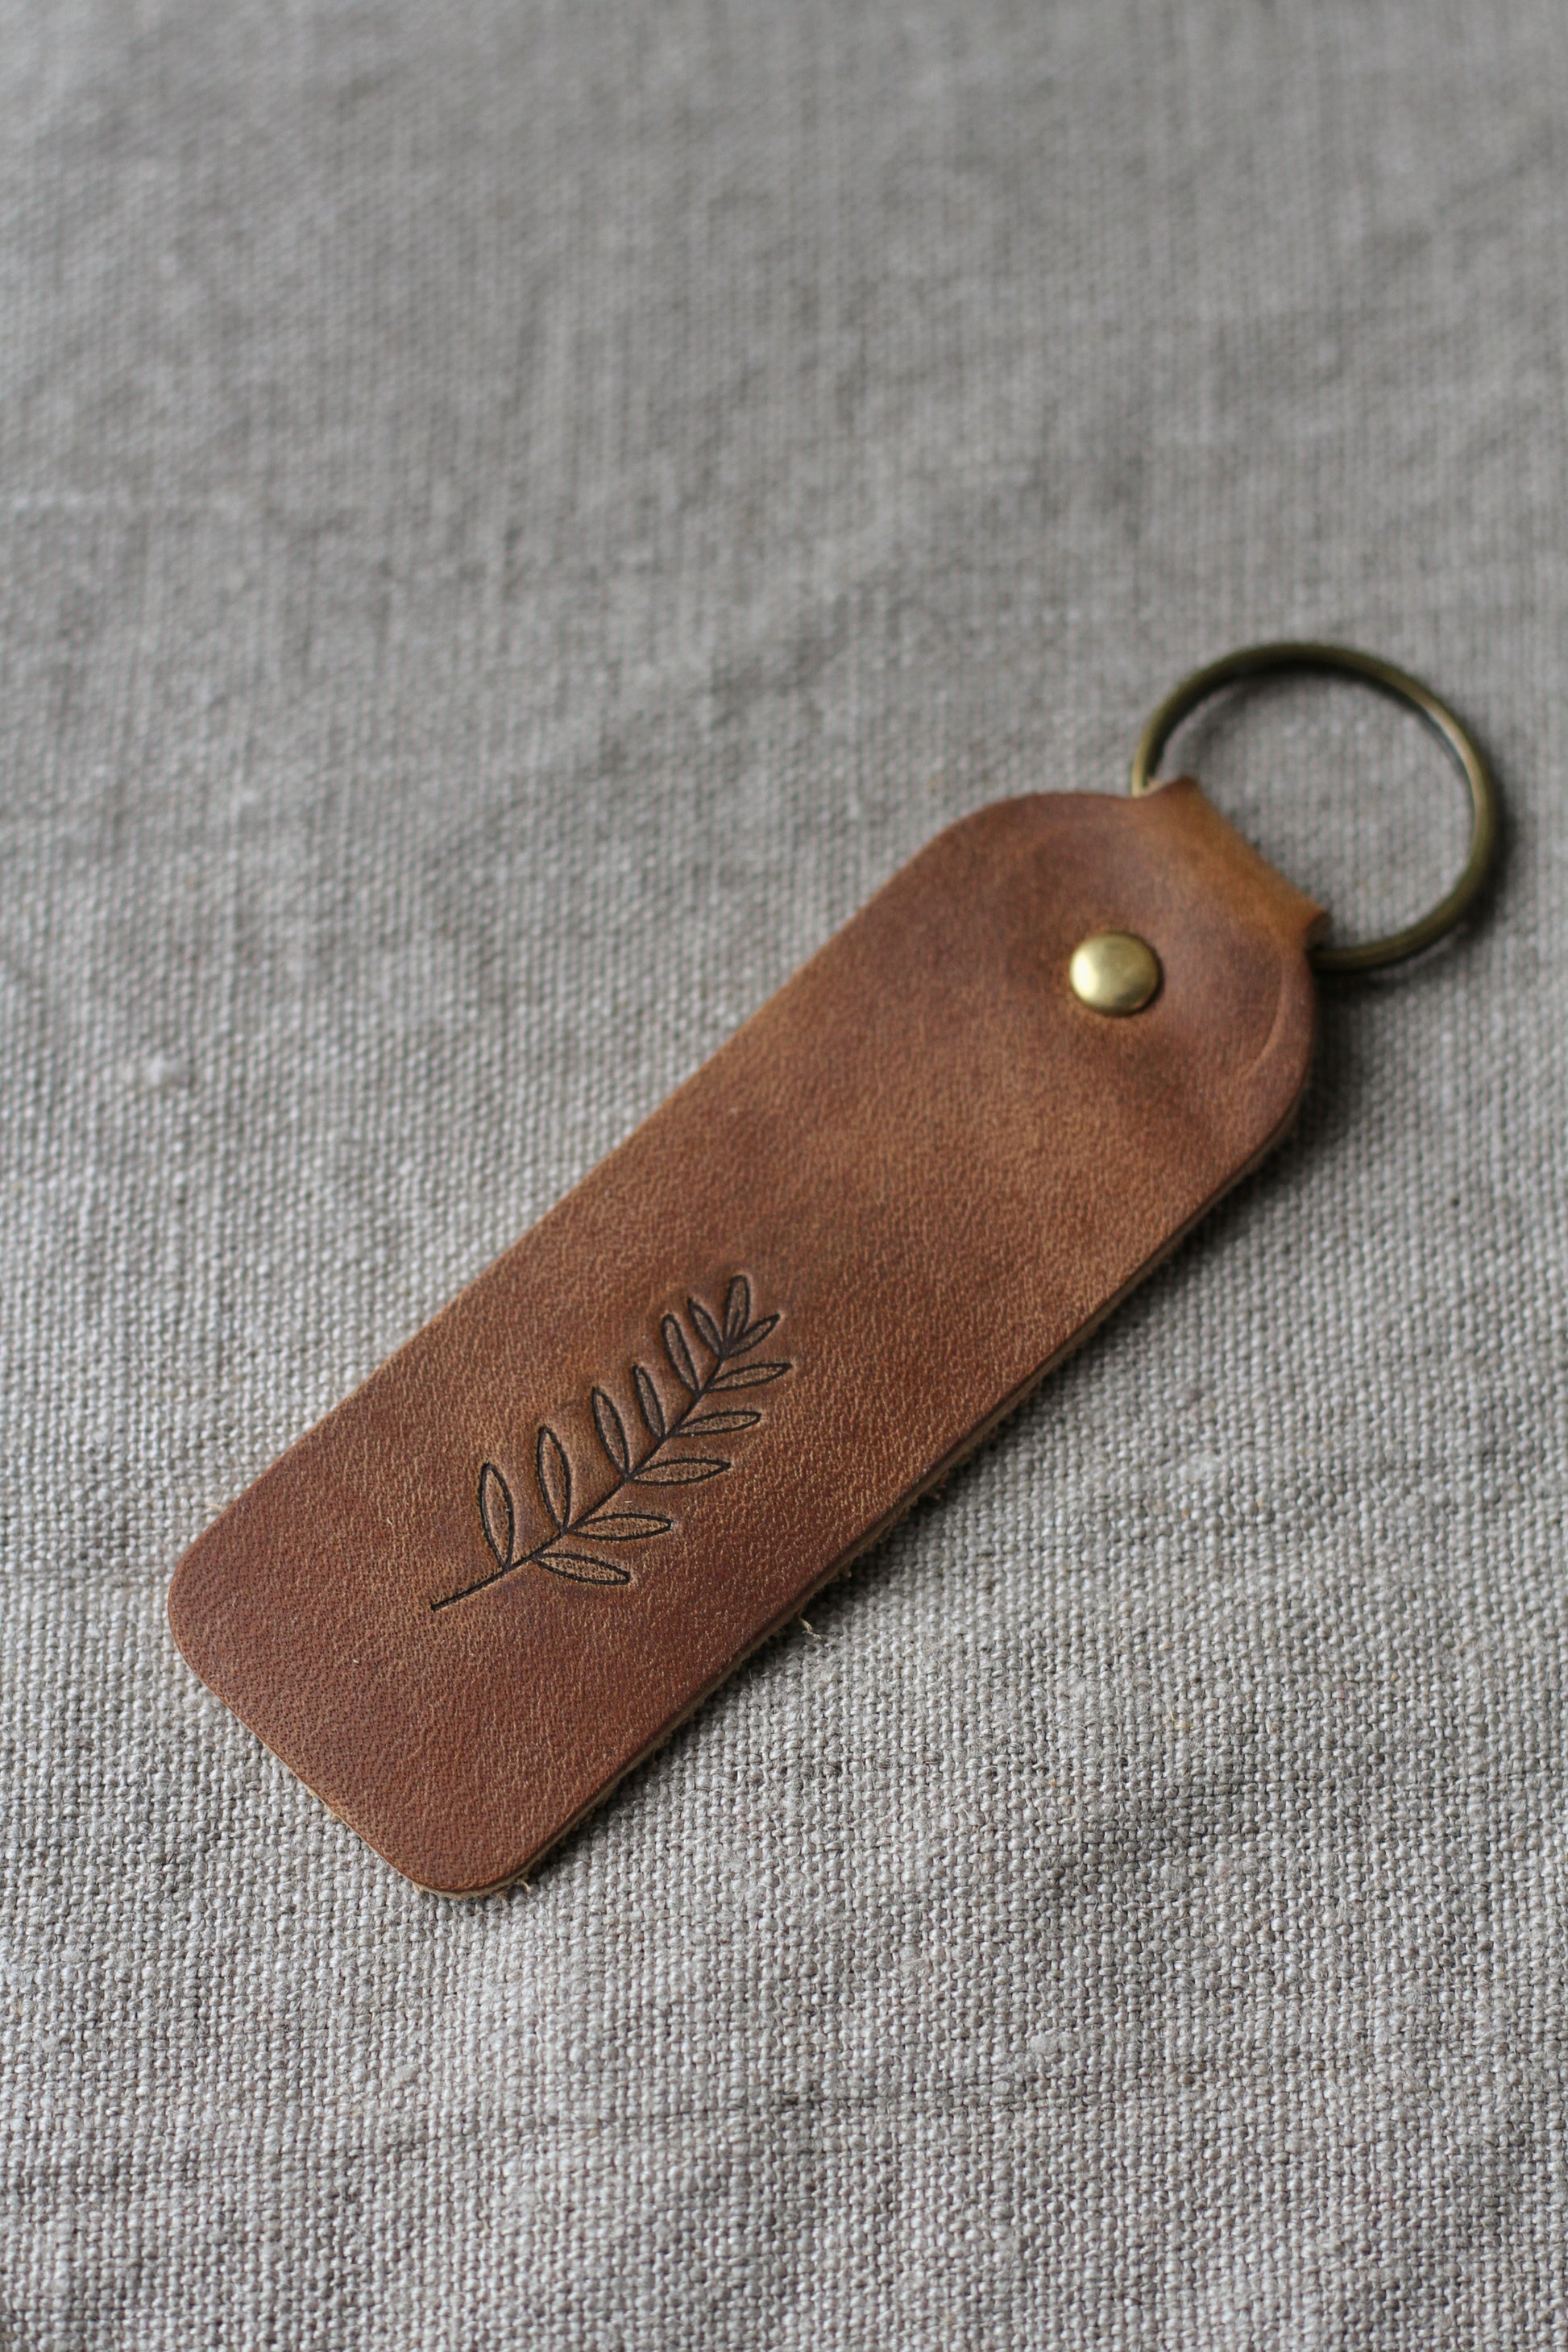 tan leather engraved key ring